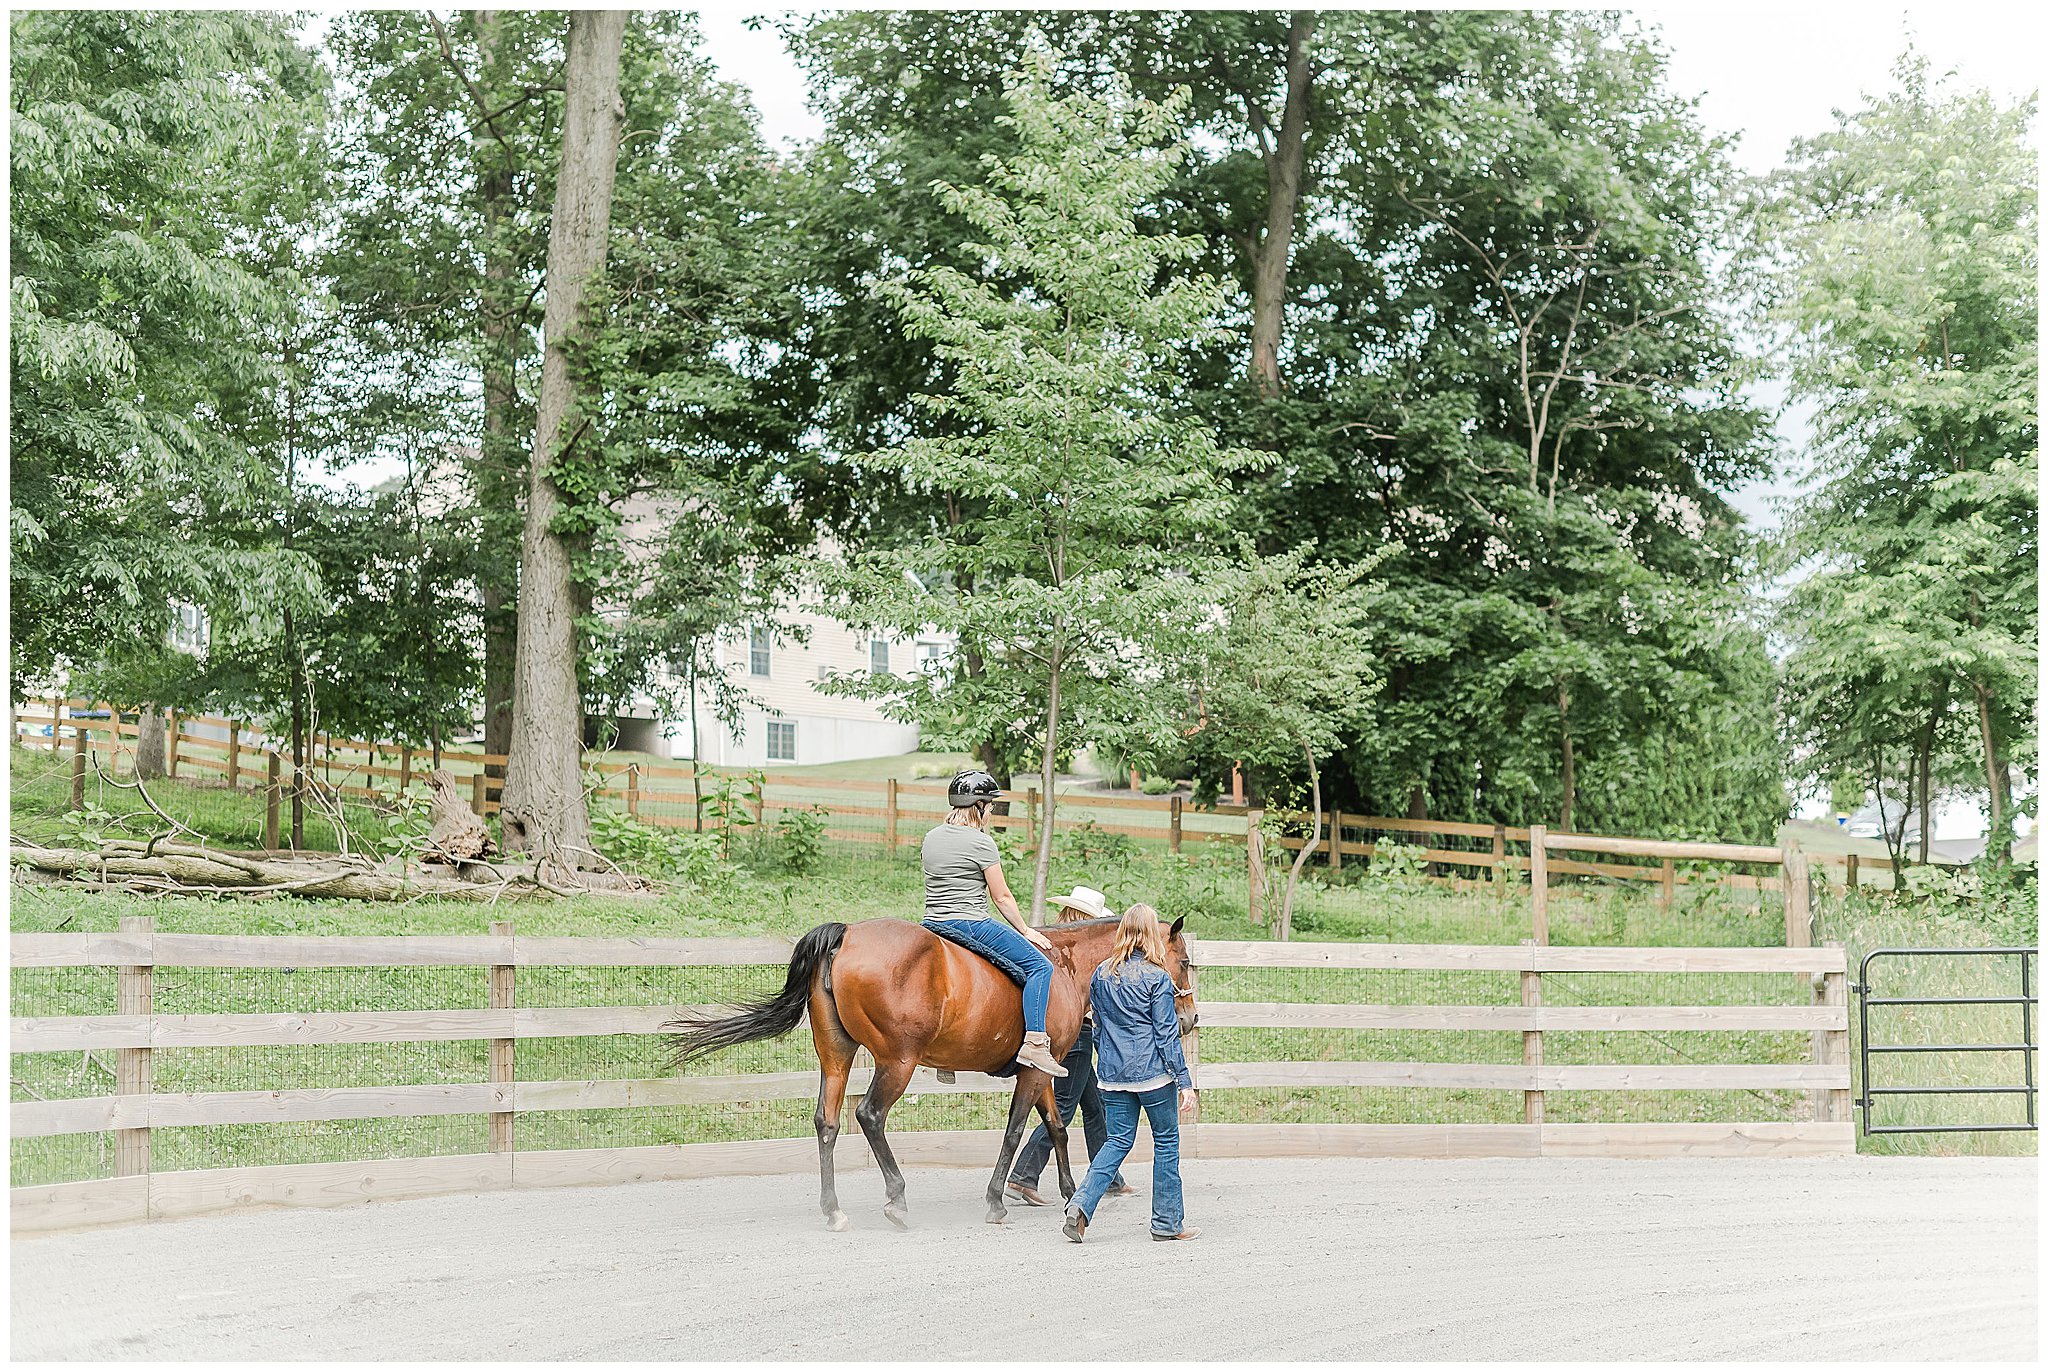 Equine Therapy | Equine Therapy Branding Session | Beacon Meadow Farms | Equine Therapy Session in PA